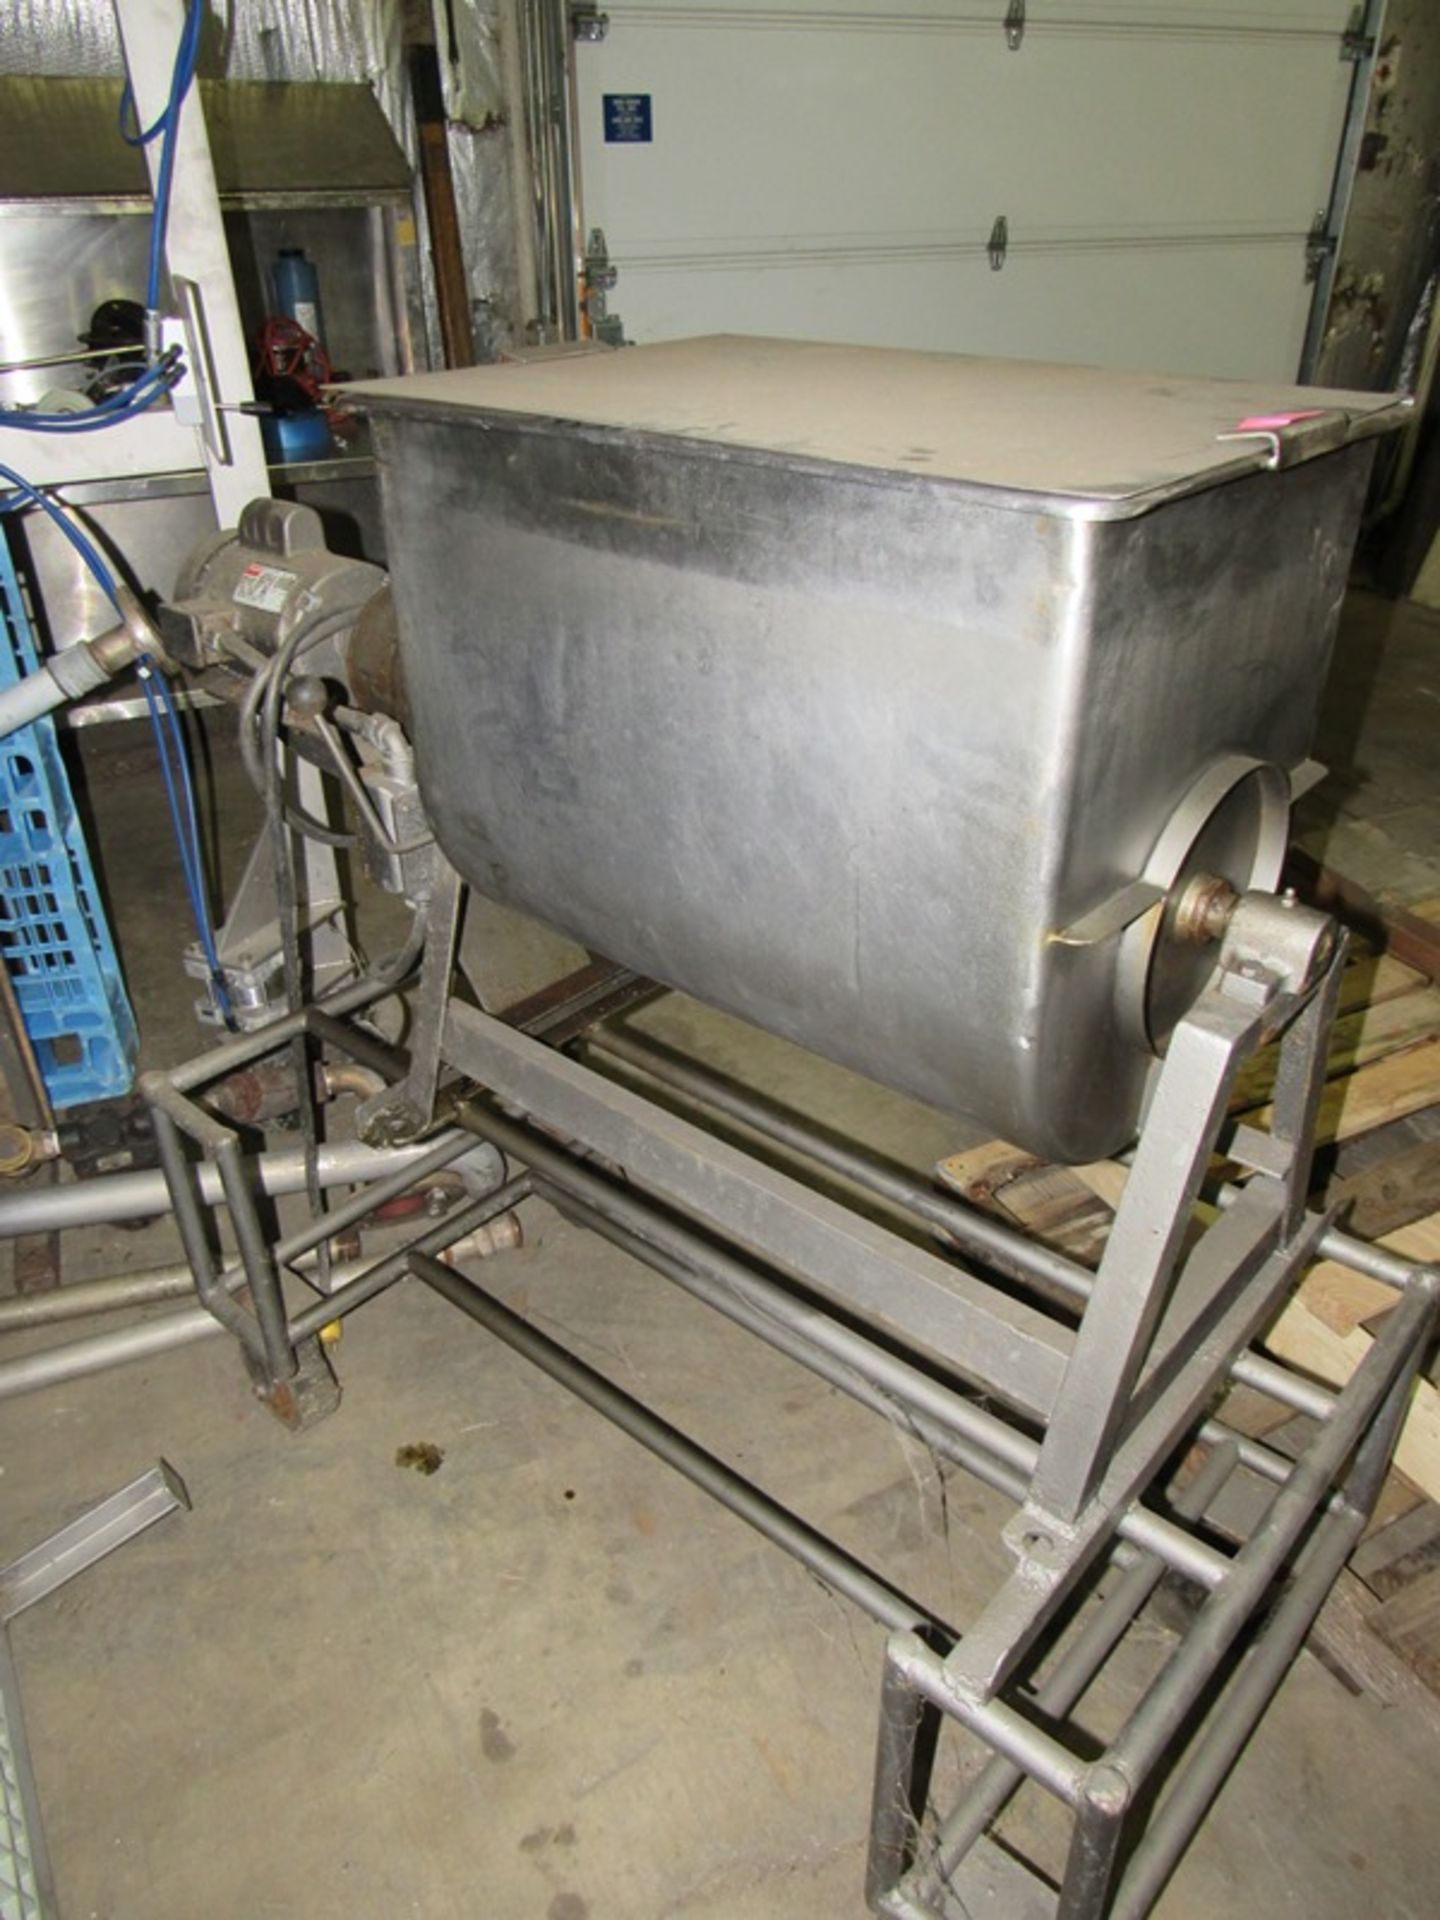 Portable Mixer, 16" W X 24" L X 18" D, stainless steel tilt out bowl, 1 h.p., dual voltage motor - Image 2 of 6